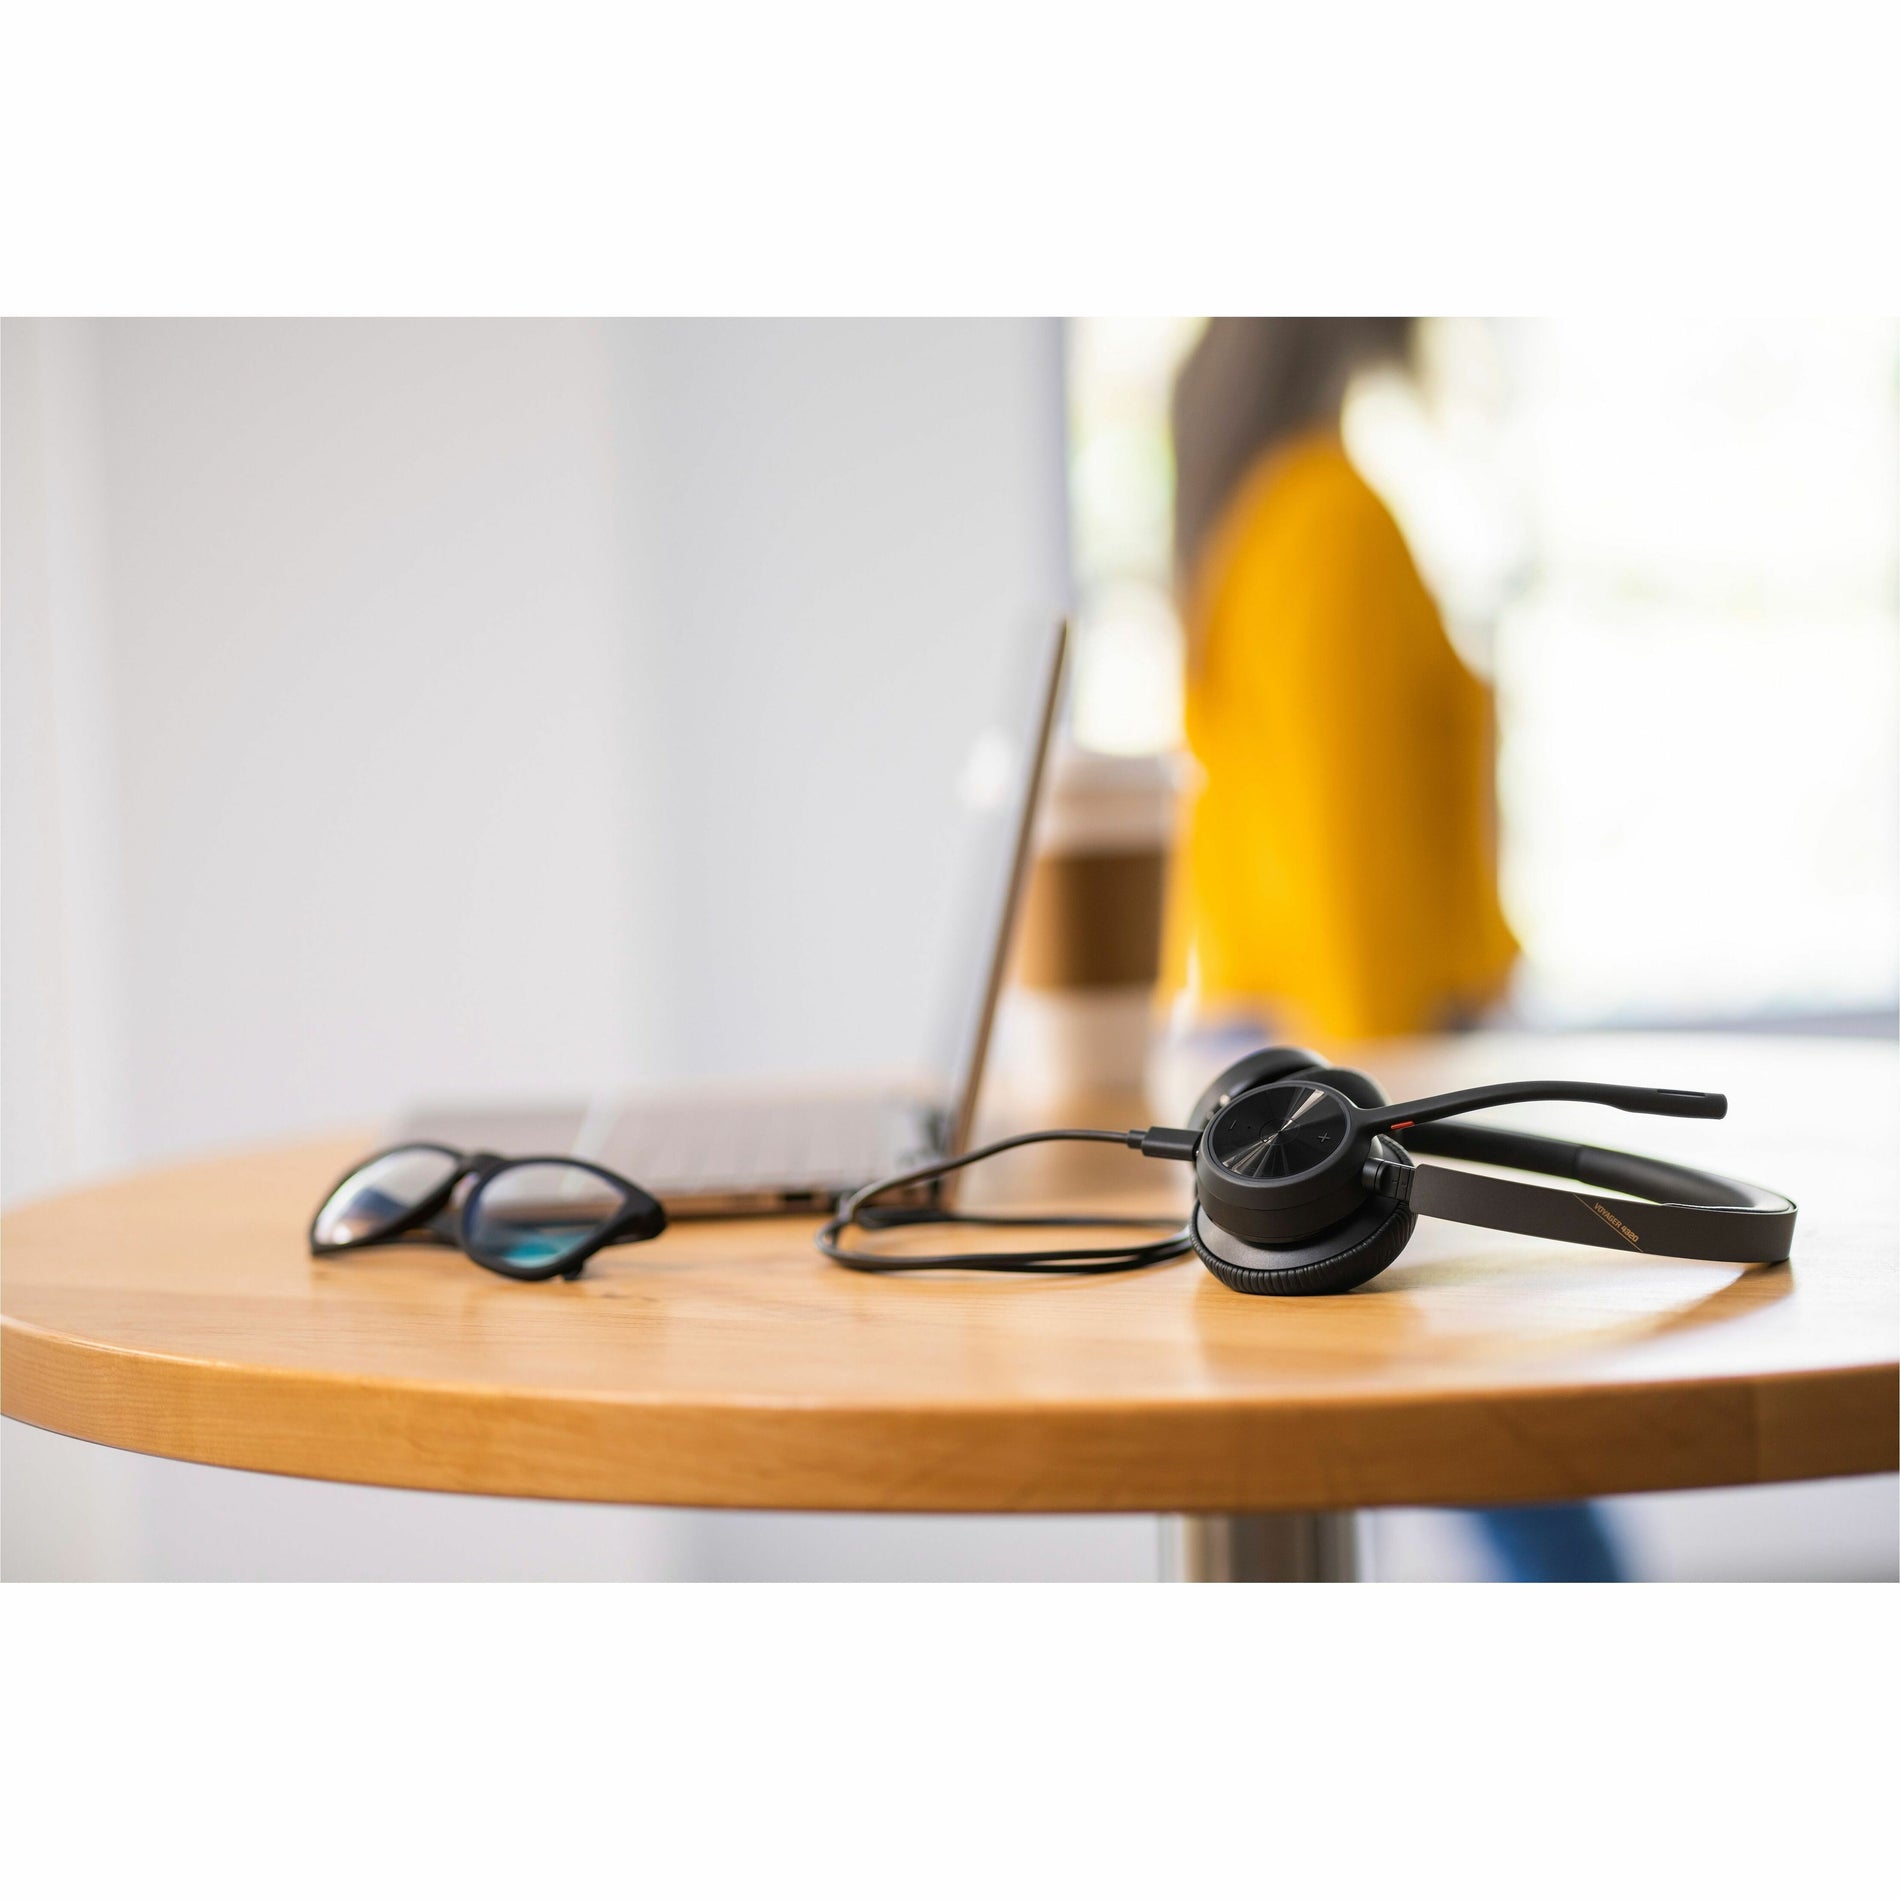 Poly Voyager 4320-M Headset, USB Type A, Microsoft Teams Certified